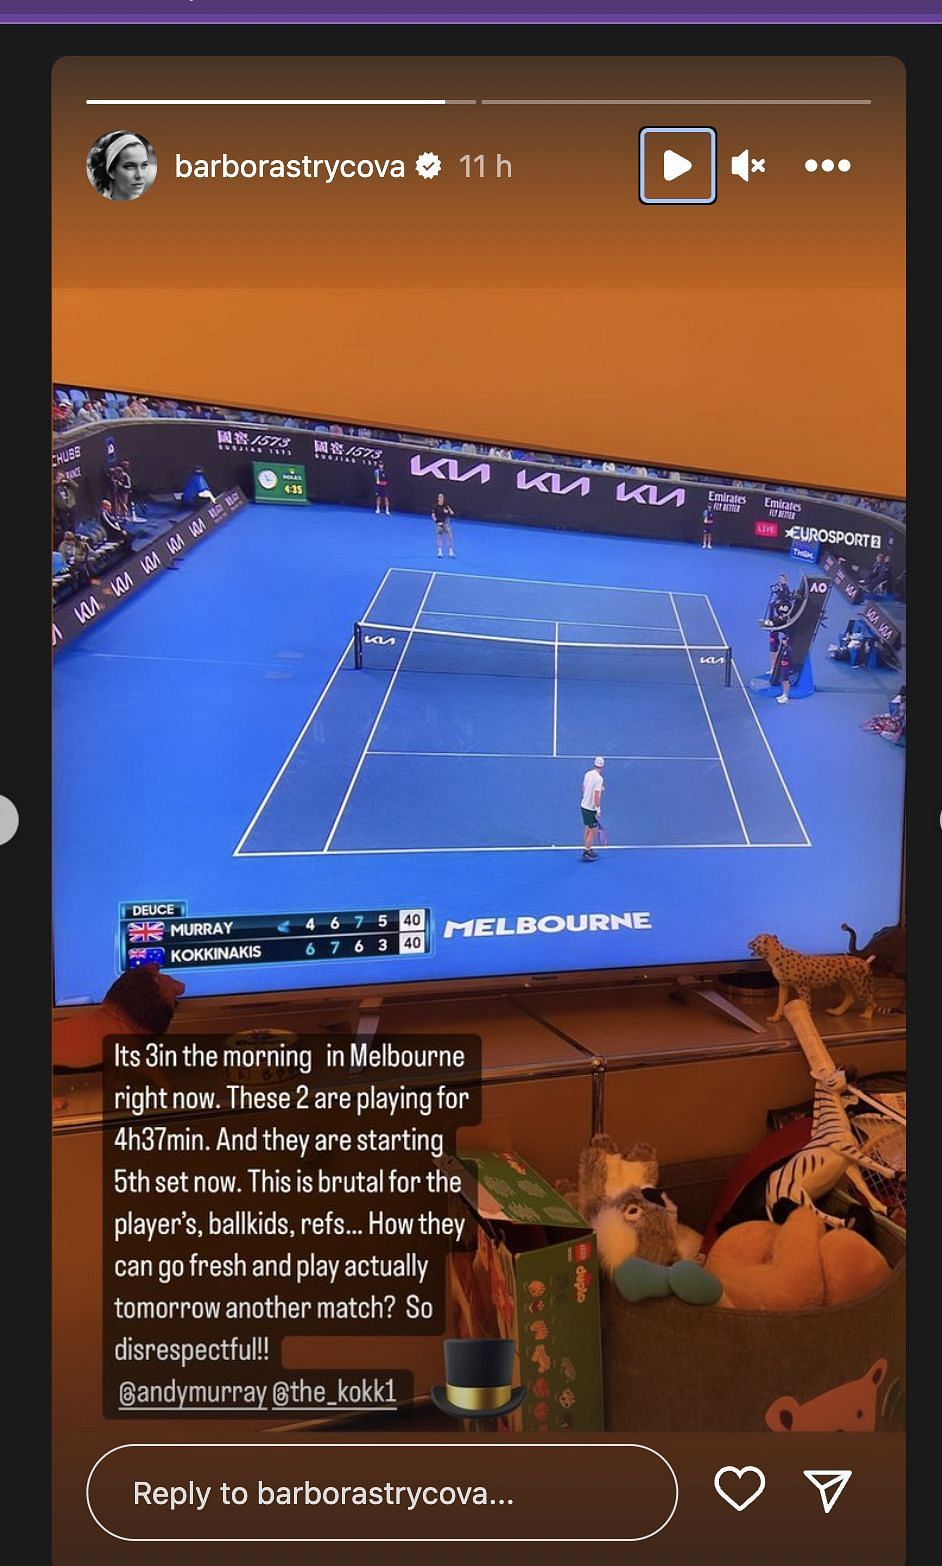 Screengrab from a fan reaction to late scheduling of matches